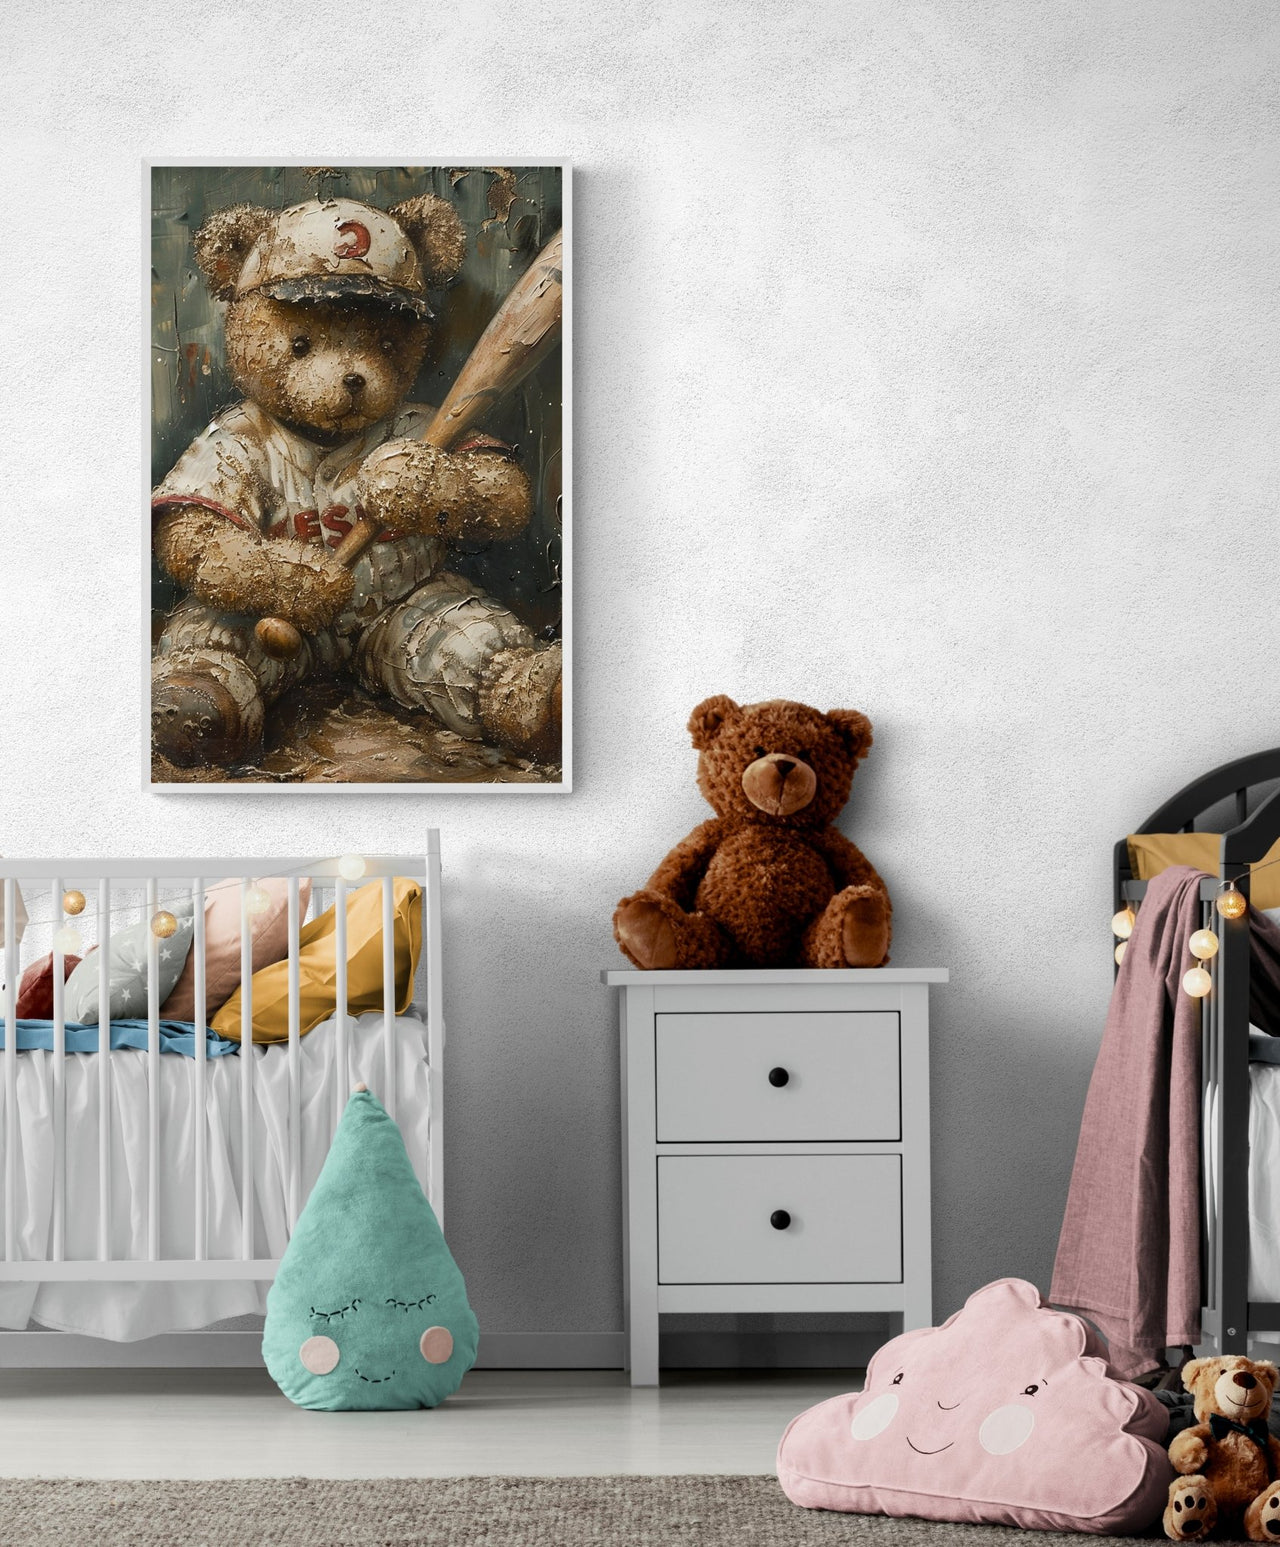 Nostalgic canvas print of a teddy bear in a baseball outfit, part of a charming nursery decor collection from Milton Wes Art, displayed on a wall in a cozy baby's room setting, available at miltonwesart.com in Harlem, NYC